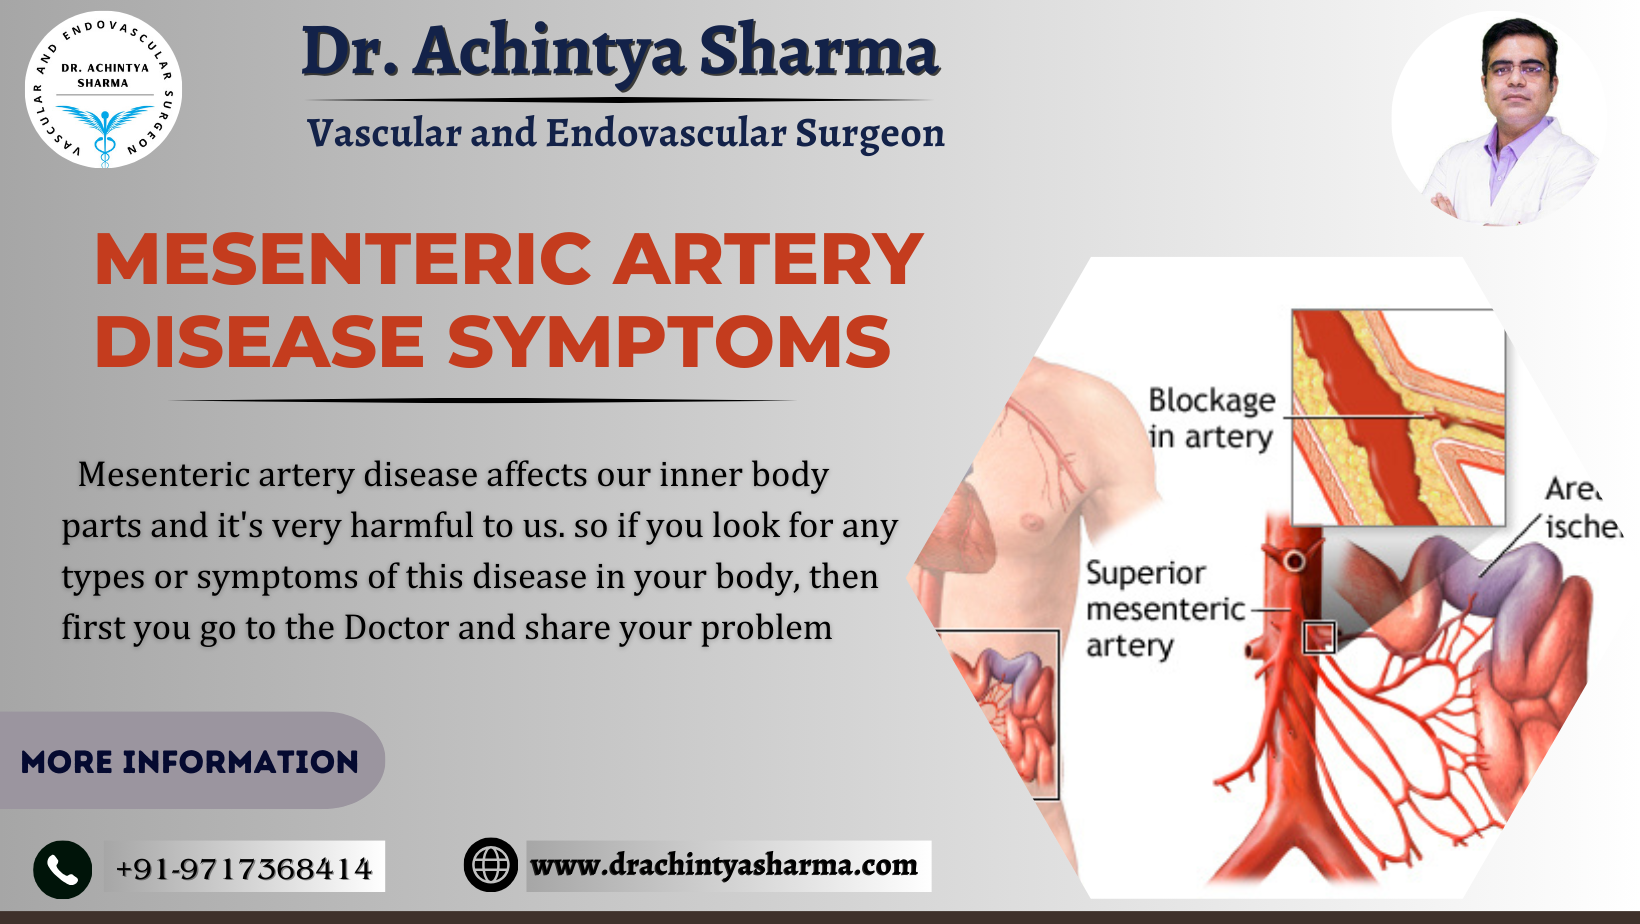 Everyone needs to understand about Mesenteric Artery Disease Symptoms